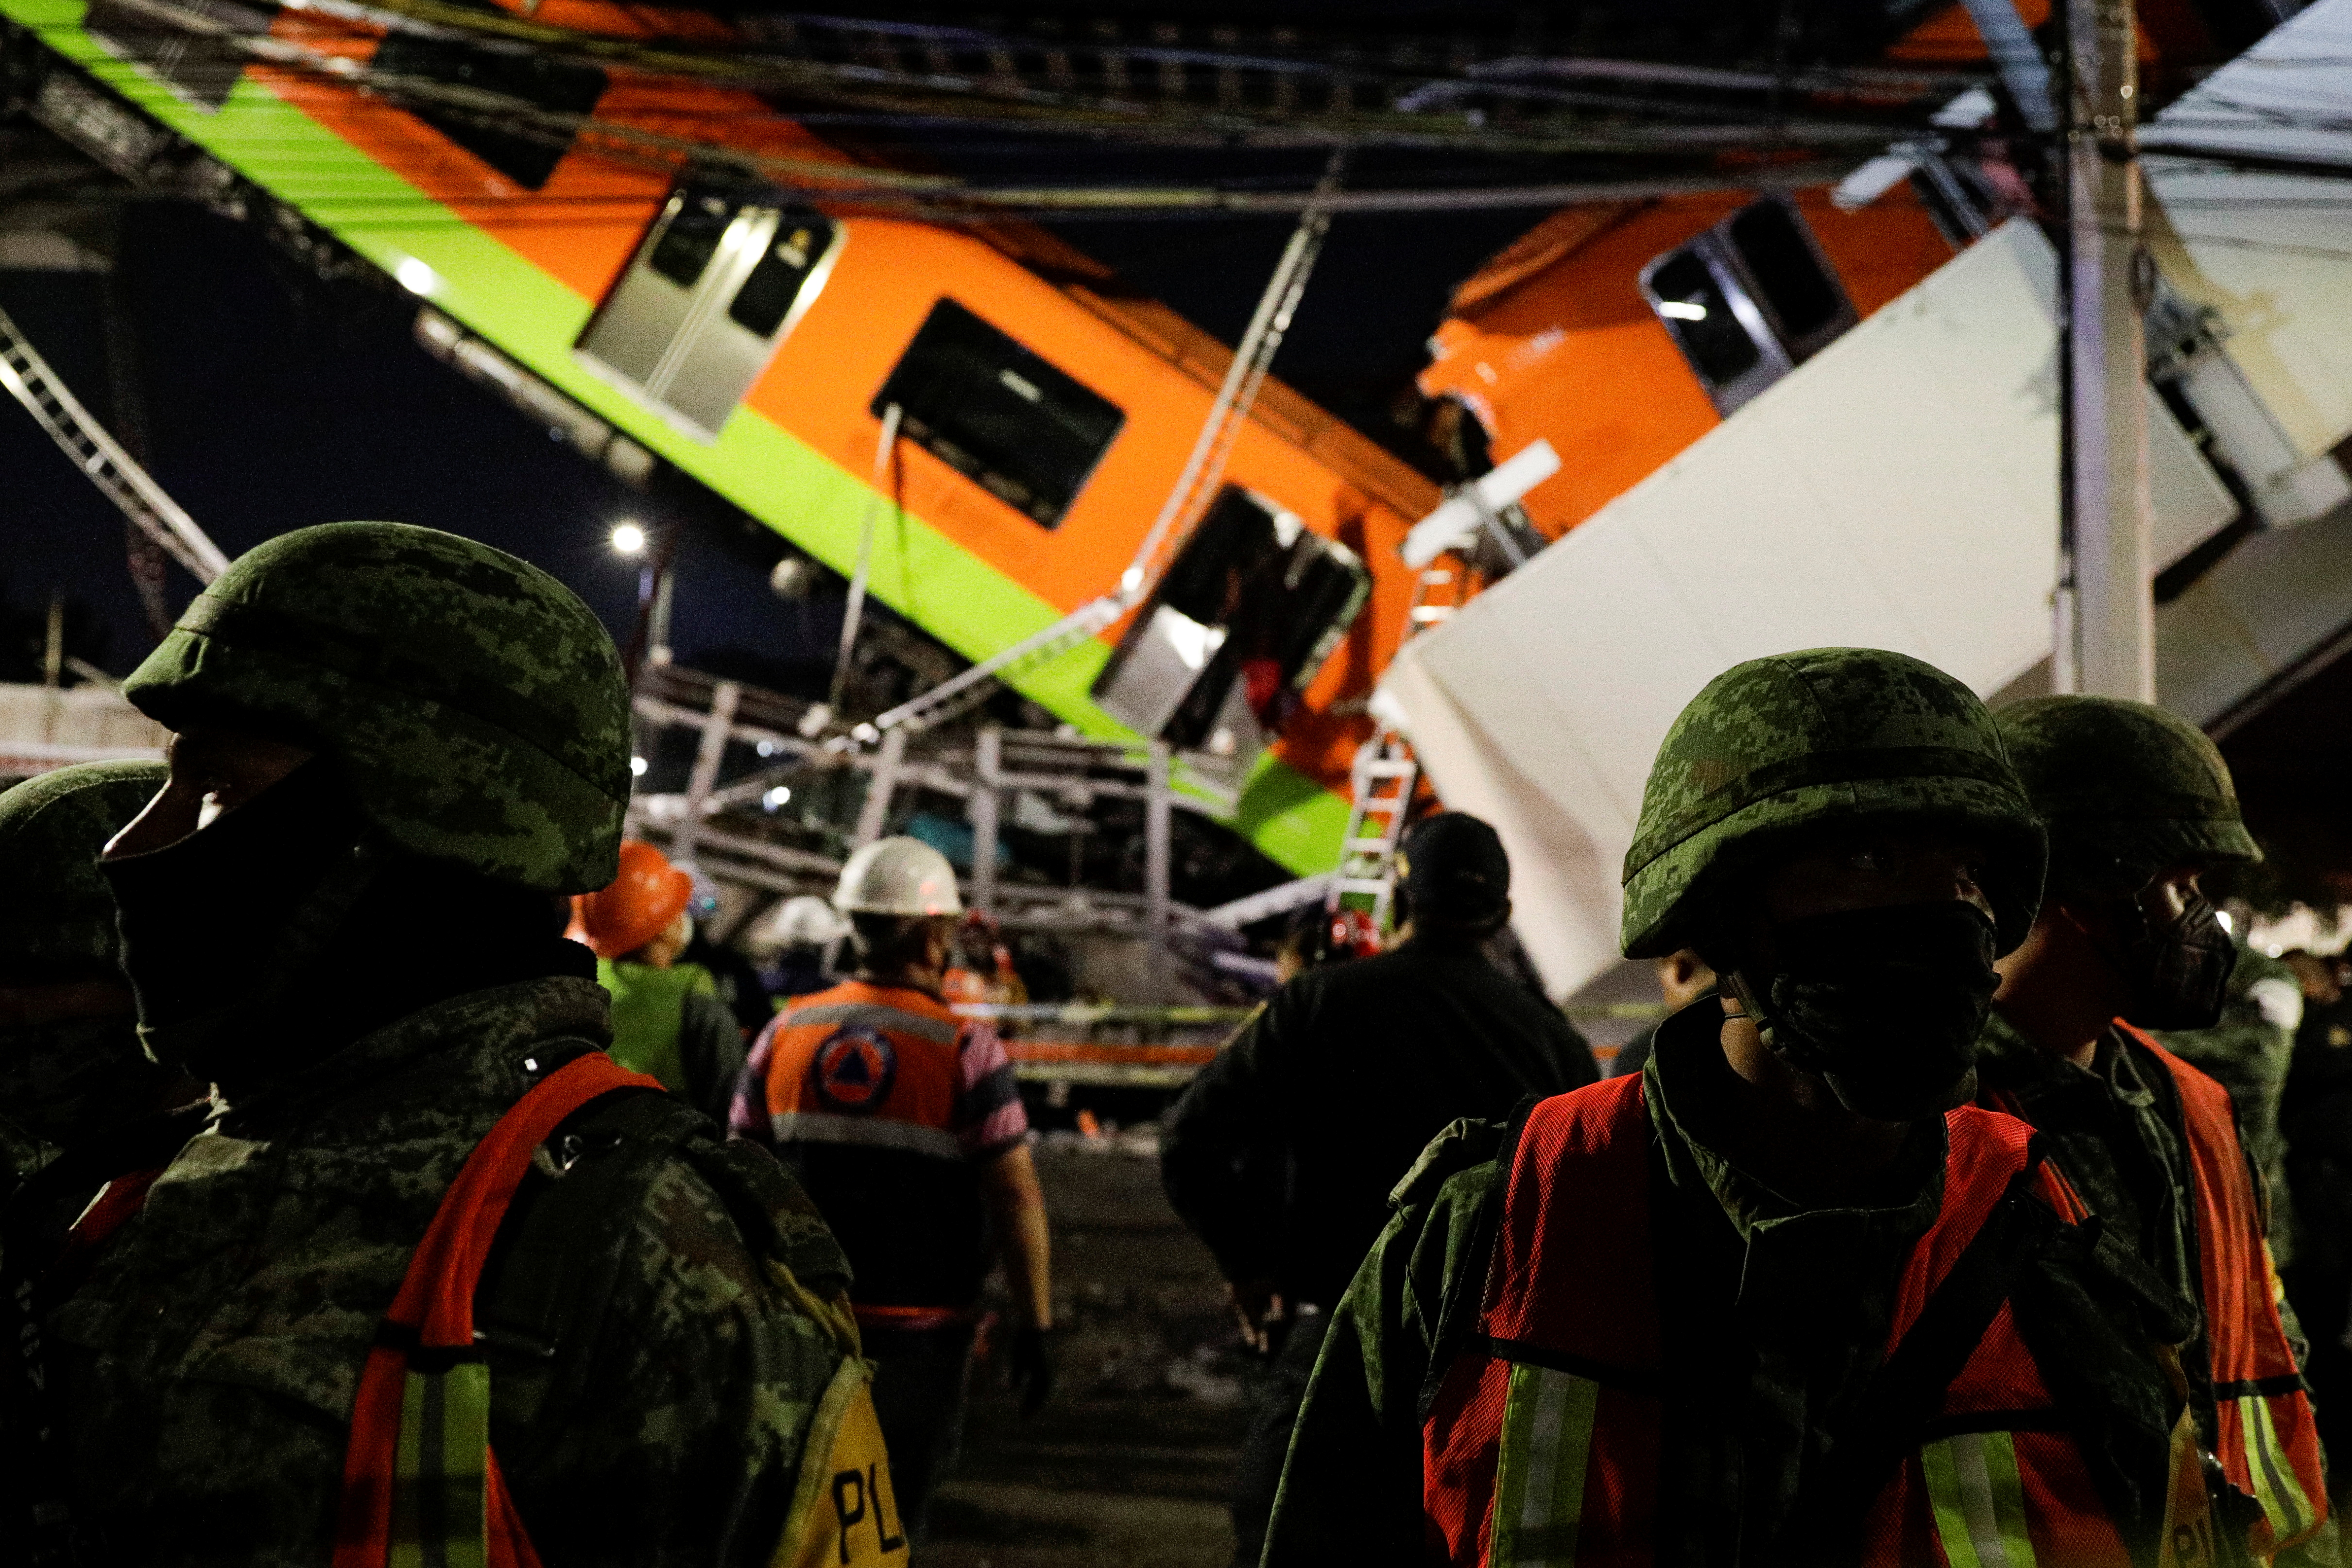 Mexico rail overpass collapses, killing 15 and injuring dozens